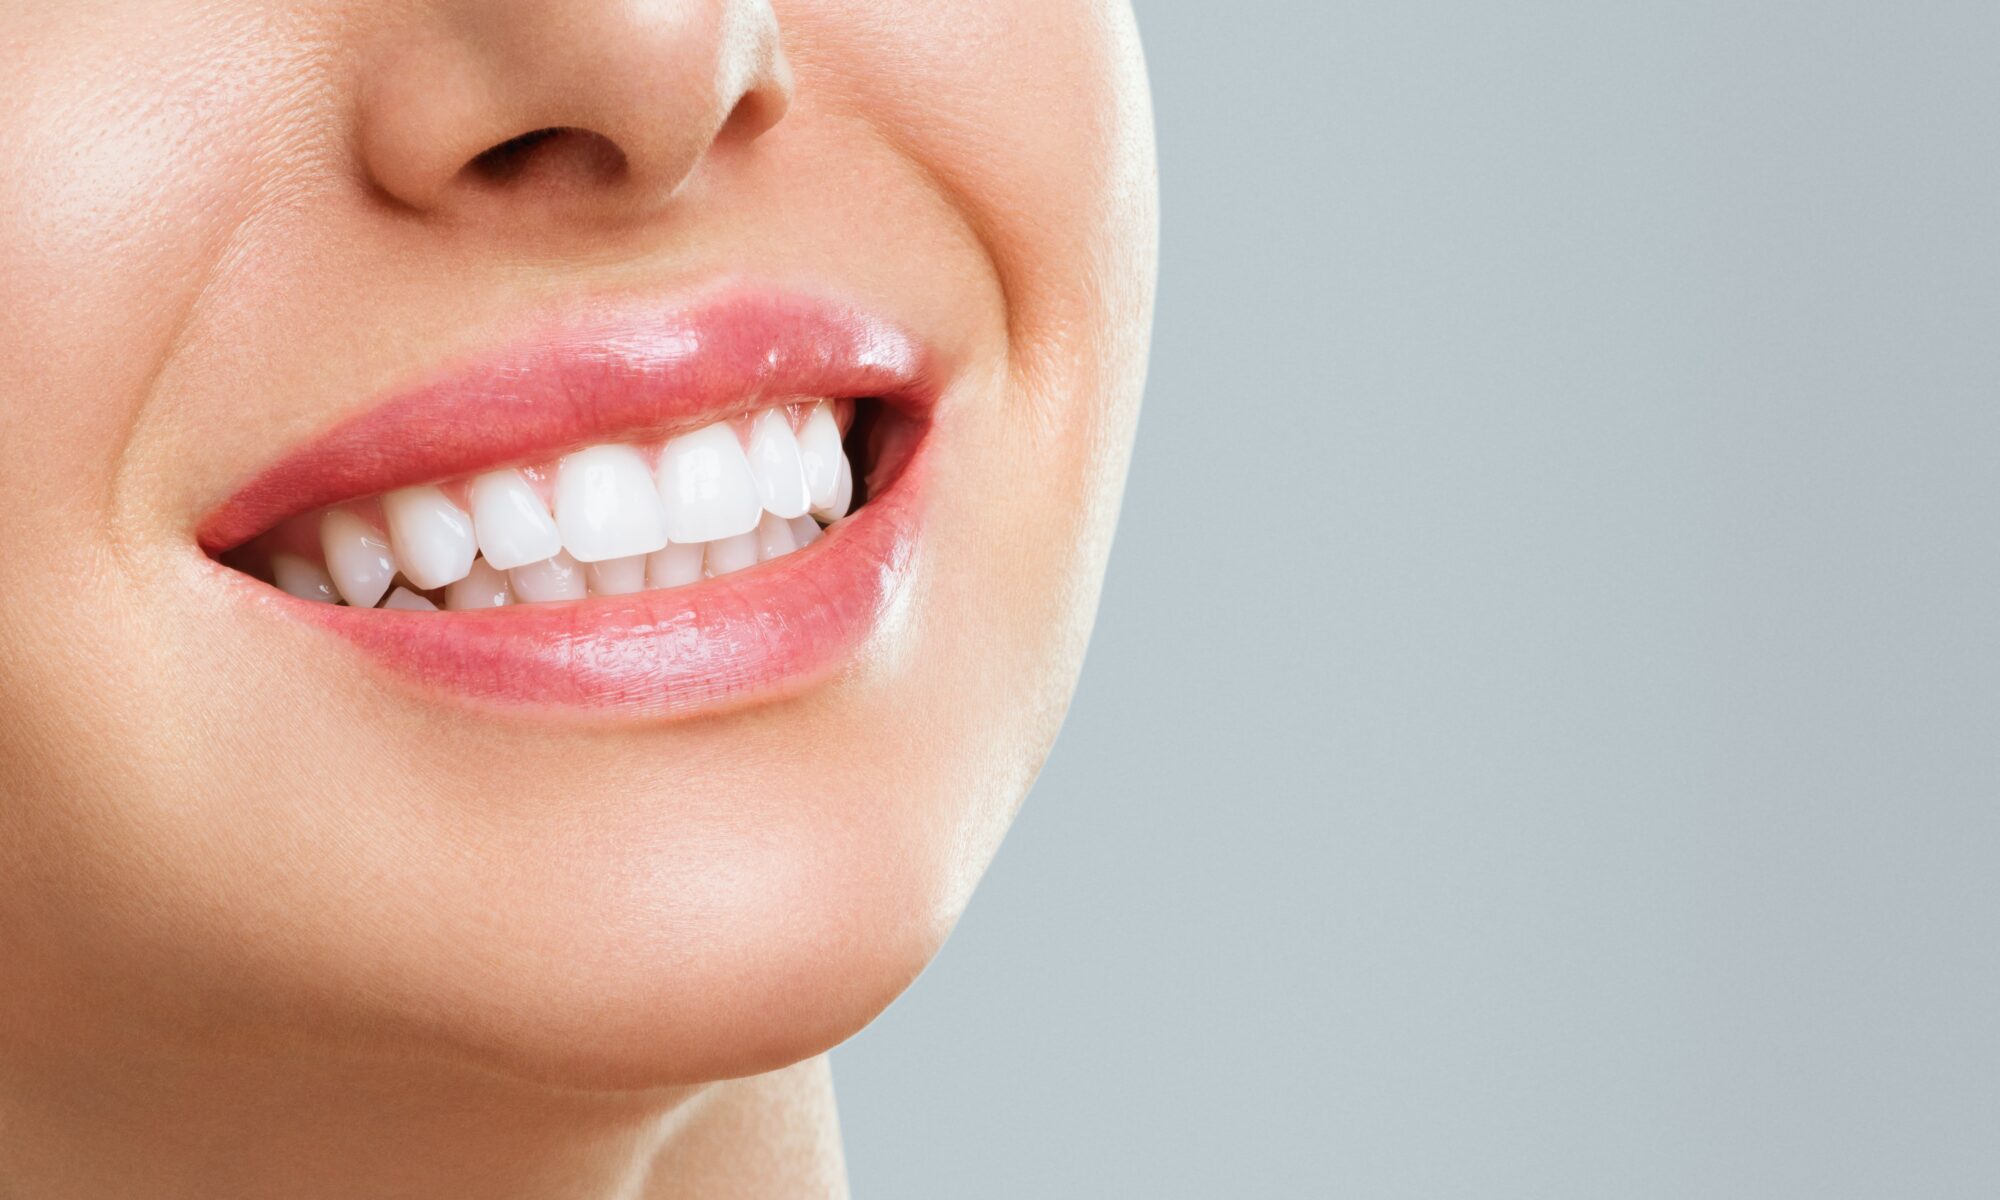 Unique Facts About Your Teeth: More Than Just a Pretty Smile